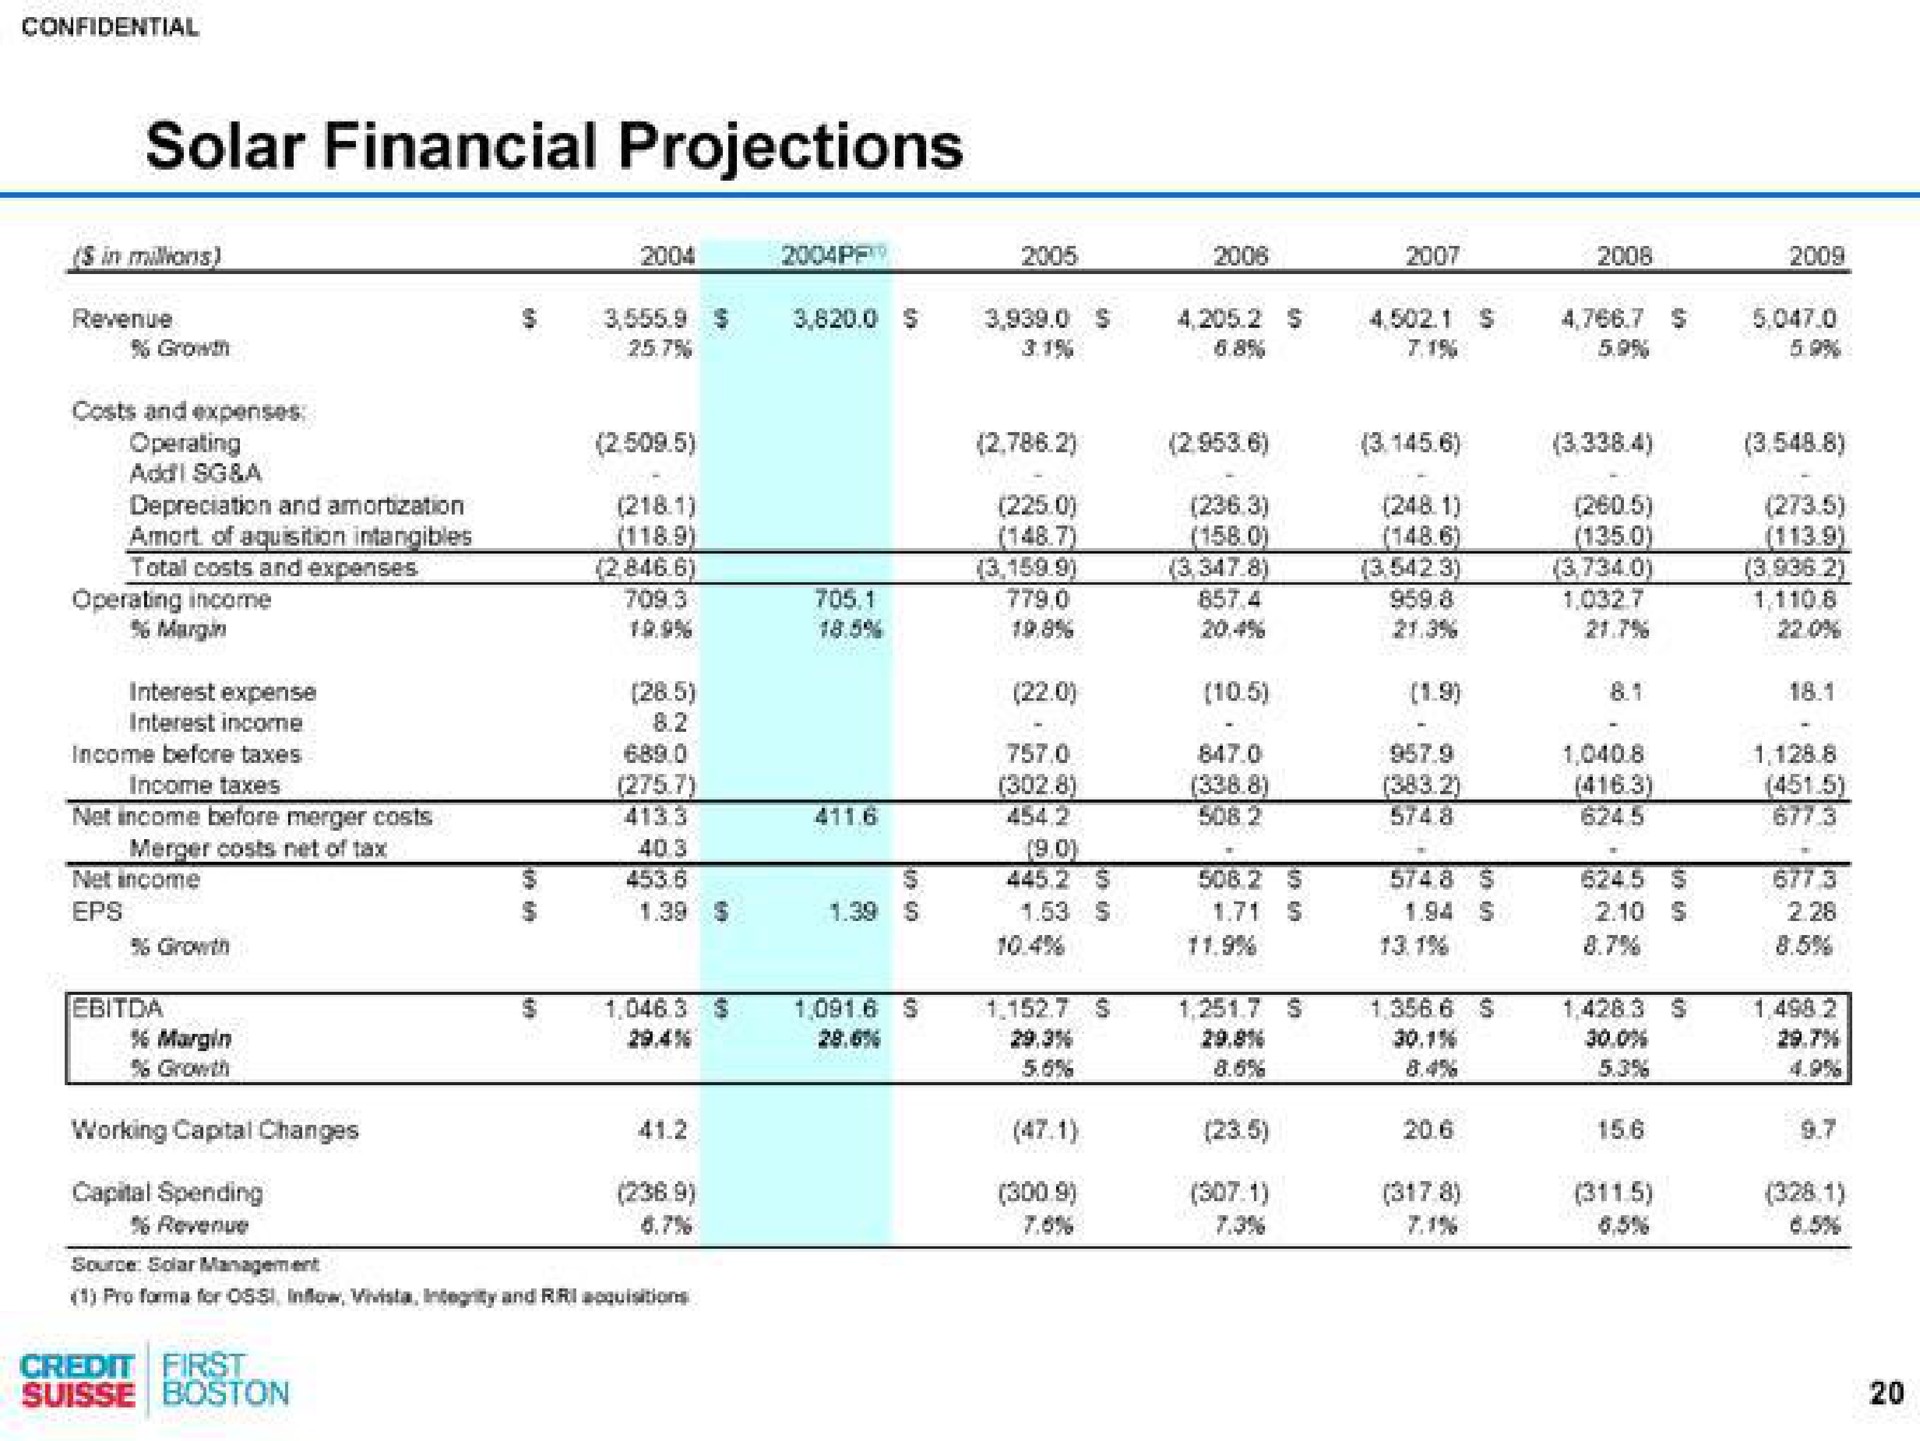 solar financial projections | Credit Suisse